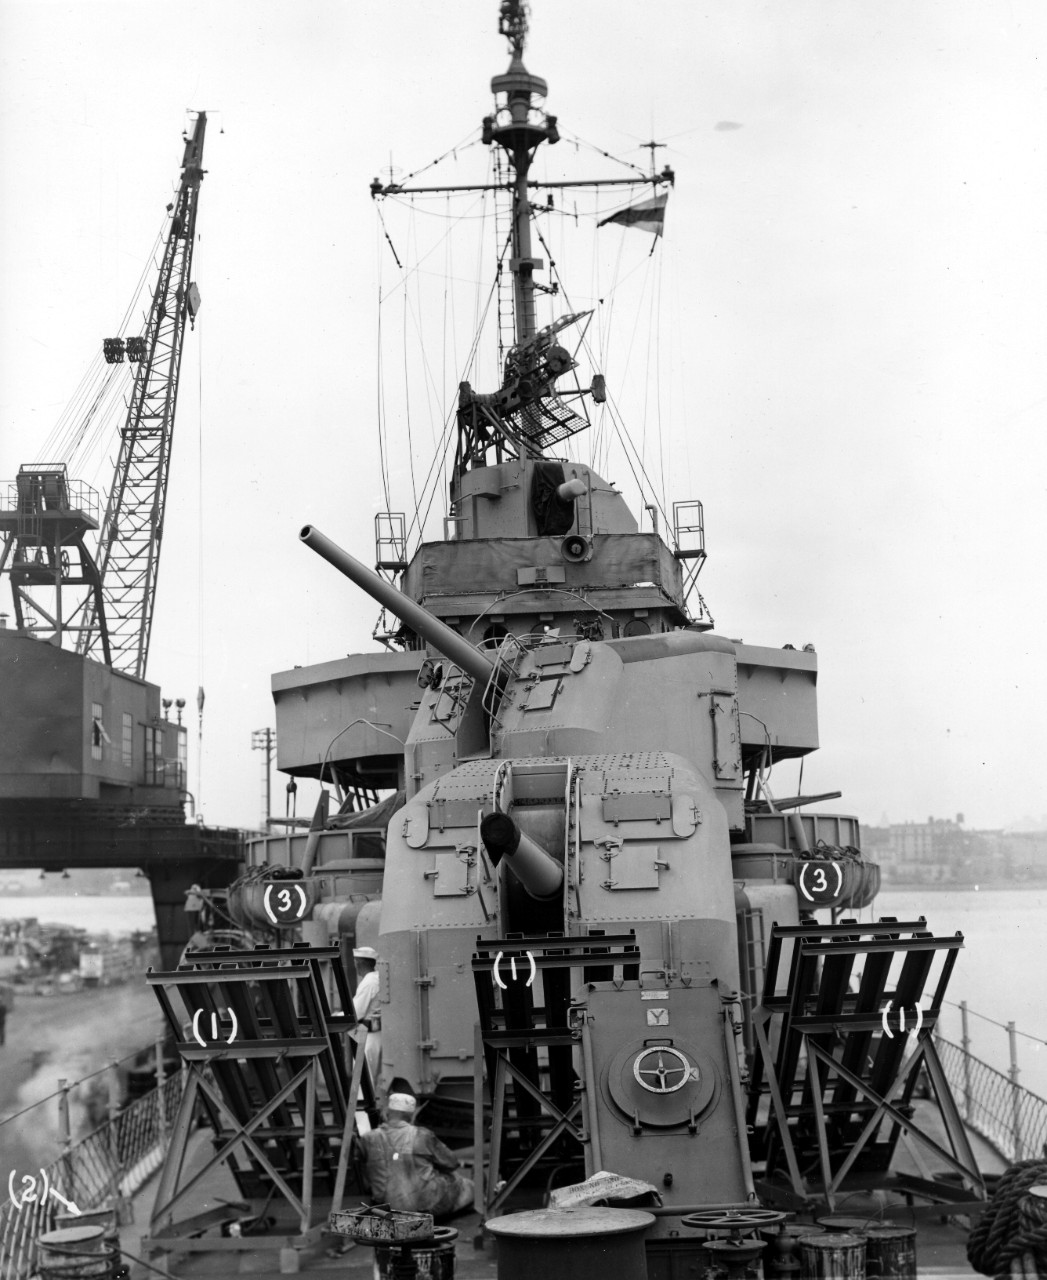 Looking aft from Glennon’s forecastle during a period of repairs and alterations at the New York Navy Yard, 3 September 1943. Note three prominent “mousetrap” anti-submarine rocket launchers, so named because of the obvious similarity with the rodent-catching device, fitted just ahead of Mt. 51. (U.S. Navy Bureau of Ships Photograph BS-51489, National Archives and Records Administration, Still Pictures Division, College Park, Md.)